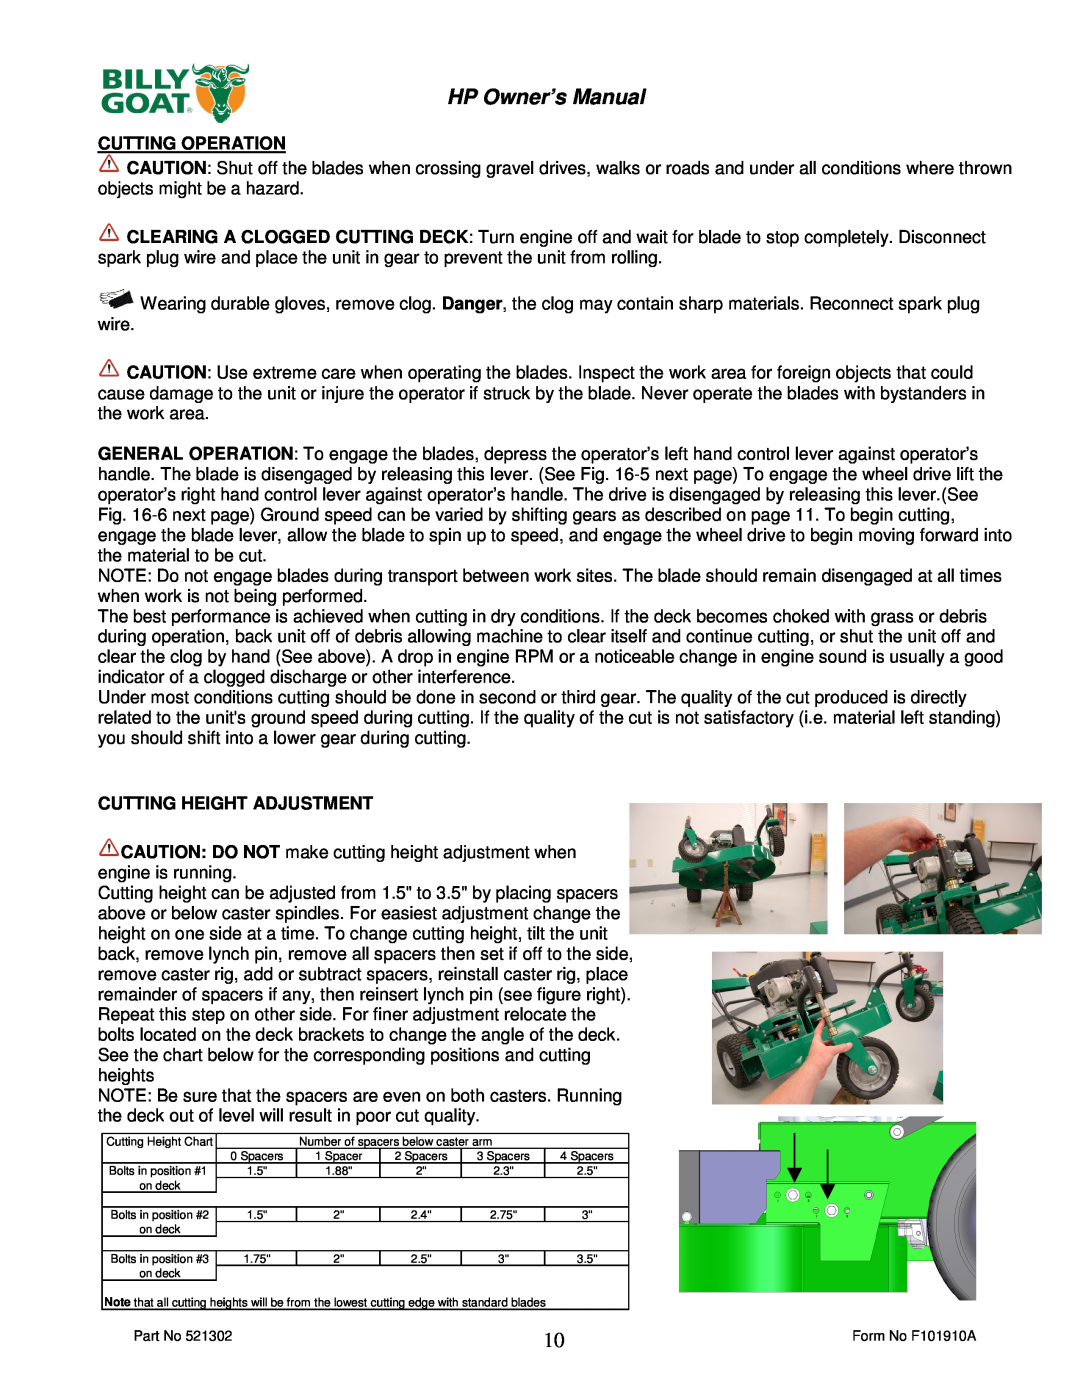 Billy Goat HP3400 owner manual HP Owner’s Manual, Cutting Operation, Cutting Height Adjustment 